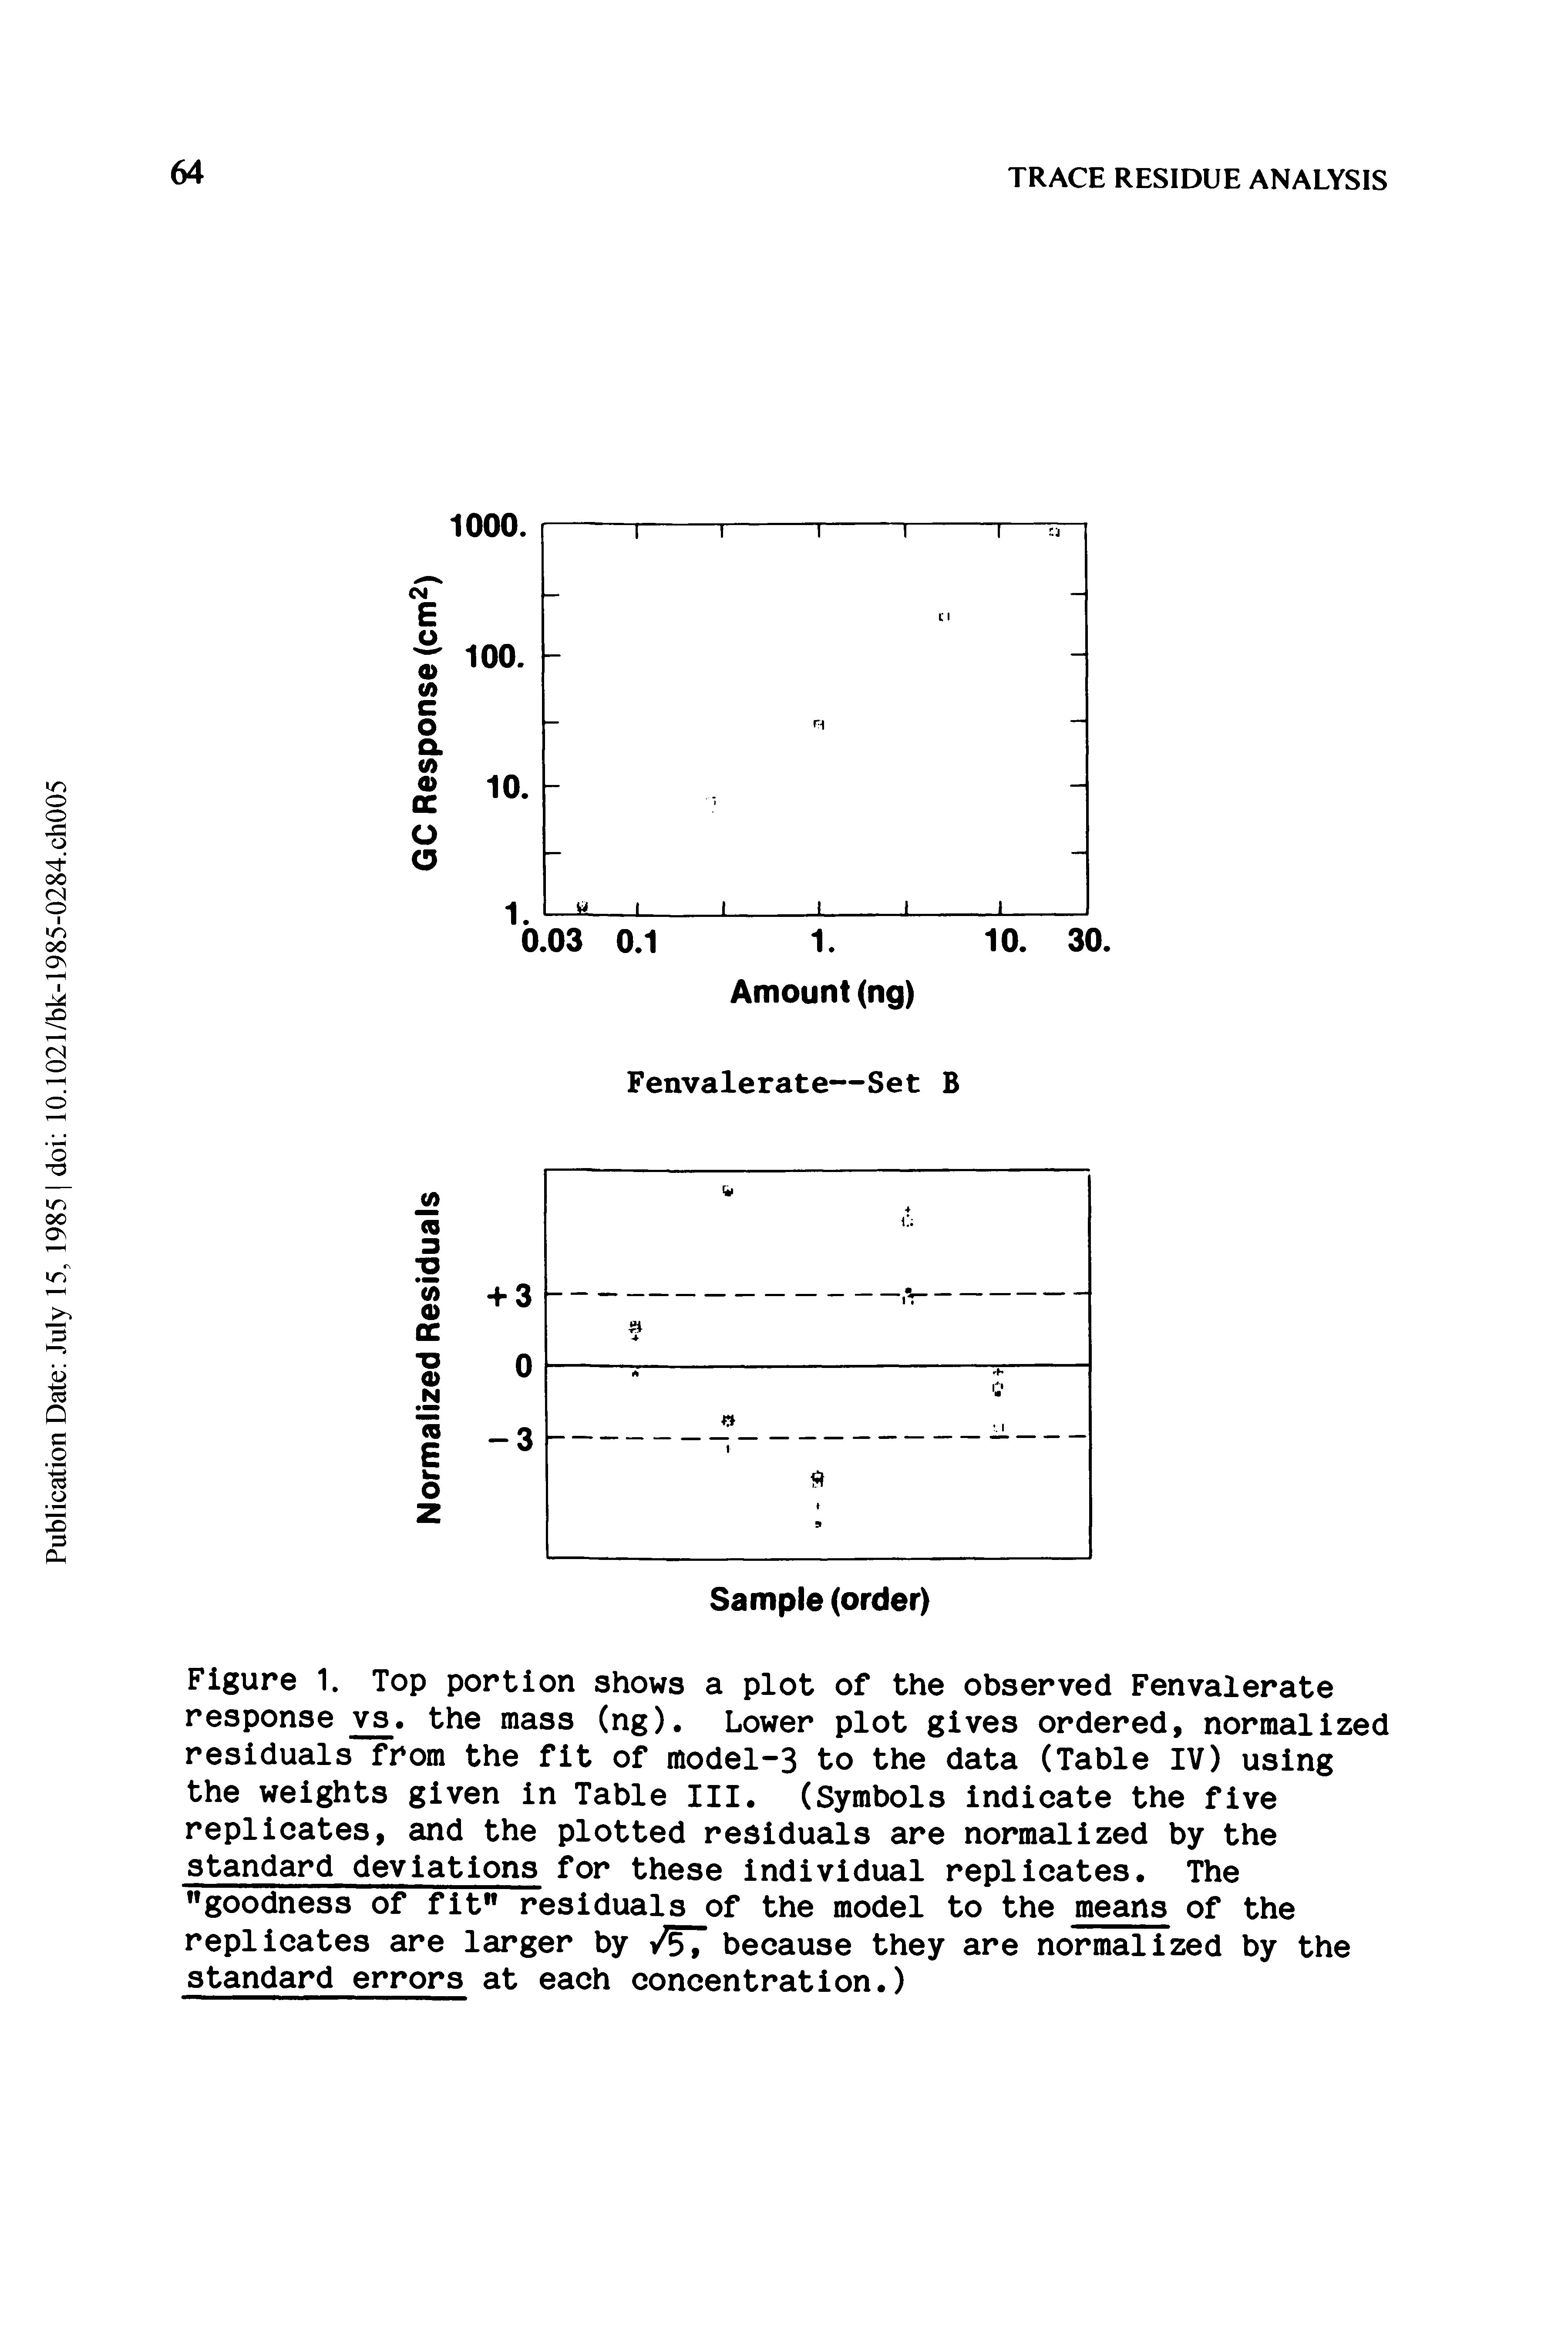 Figure 1. Top portion shows a plot of the observed Fenvalerate response vs. the mass (ng). Lower plot gives ordered, normalized residuals from the fit of model-3 to the data (Table IV) using the weights given in Table III. (Symbols indicate the five replicates, and the plotted residuals are normalized by the standard deviations for these individual replicates. The "goodness of fit residuals of the model to the means of the replicates are larger by 1/5T because they are normalized by the standard errors at each concentration.)...